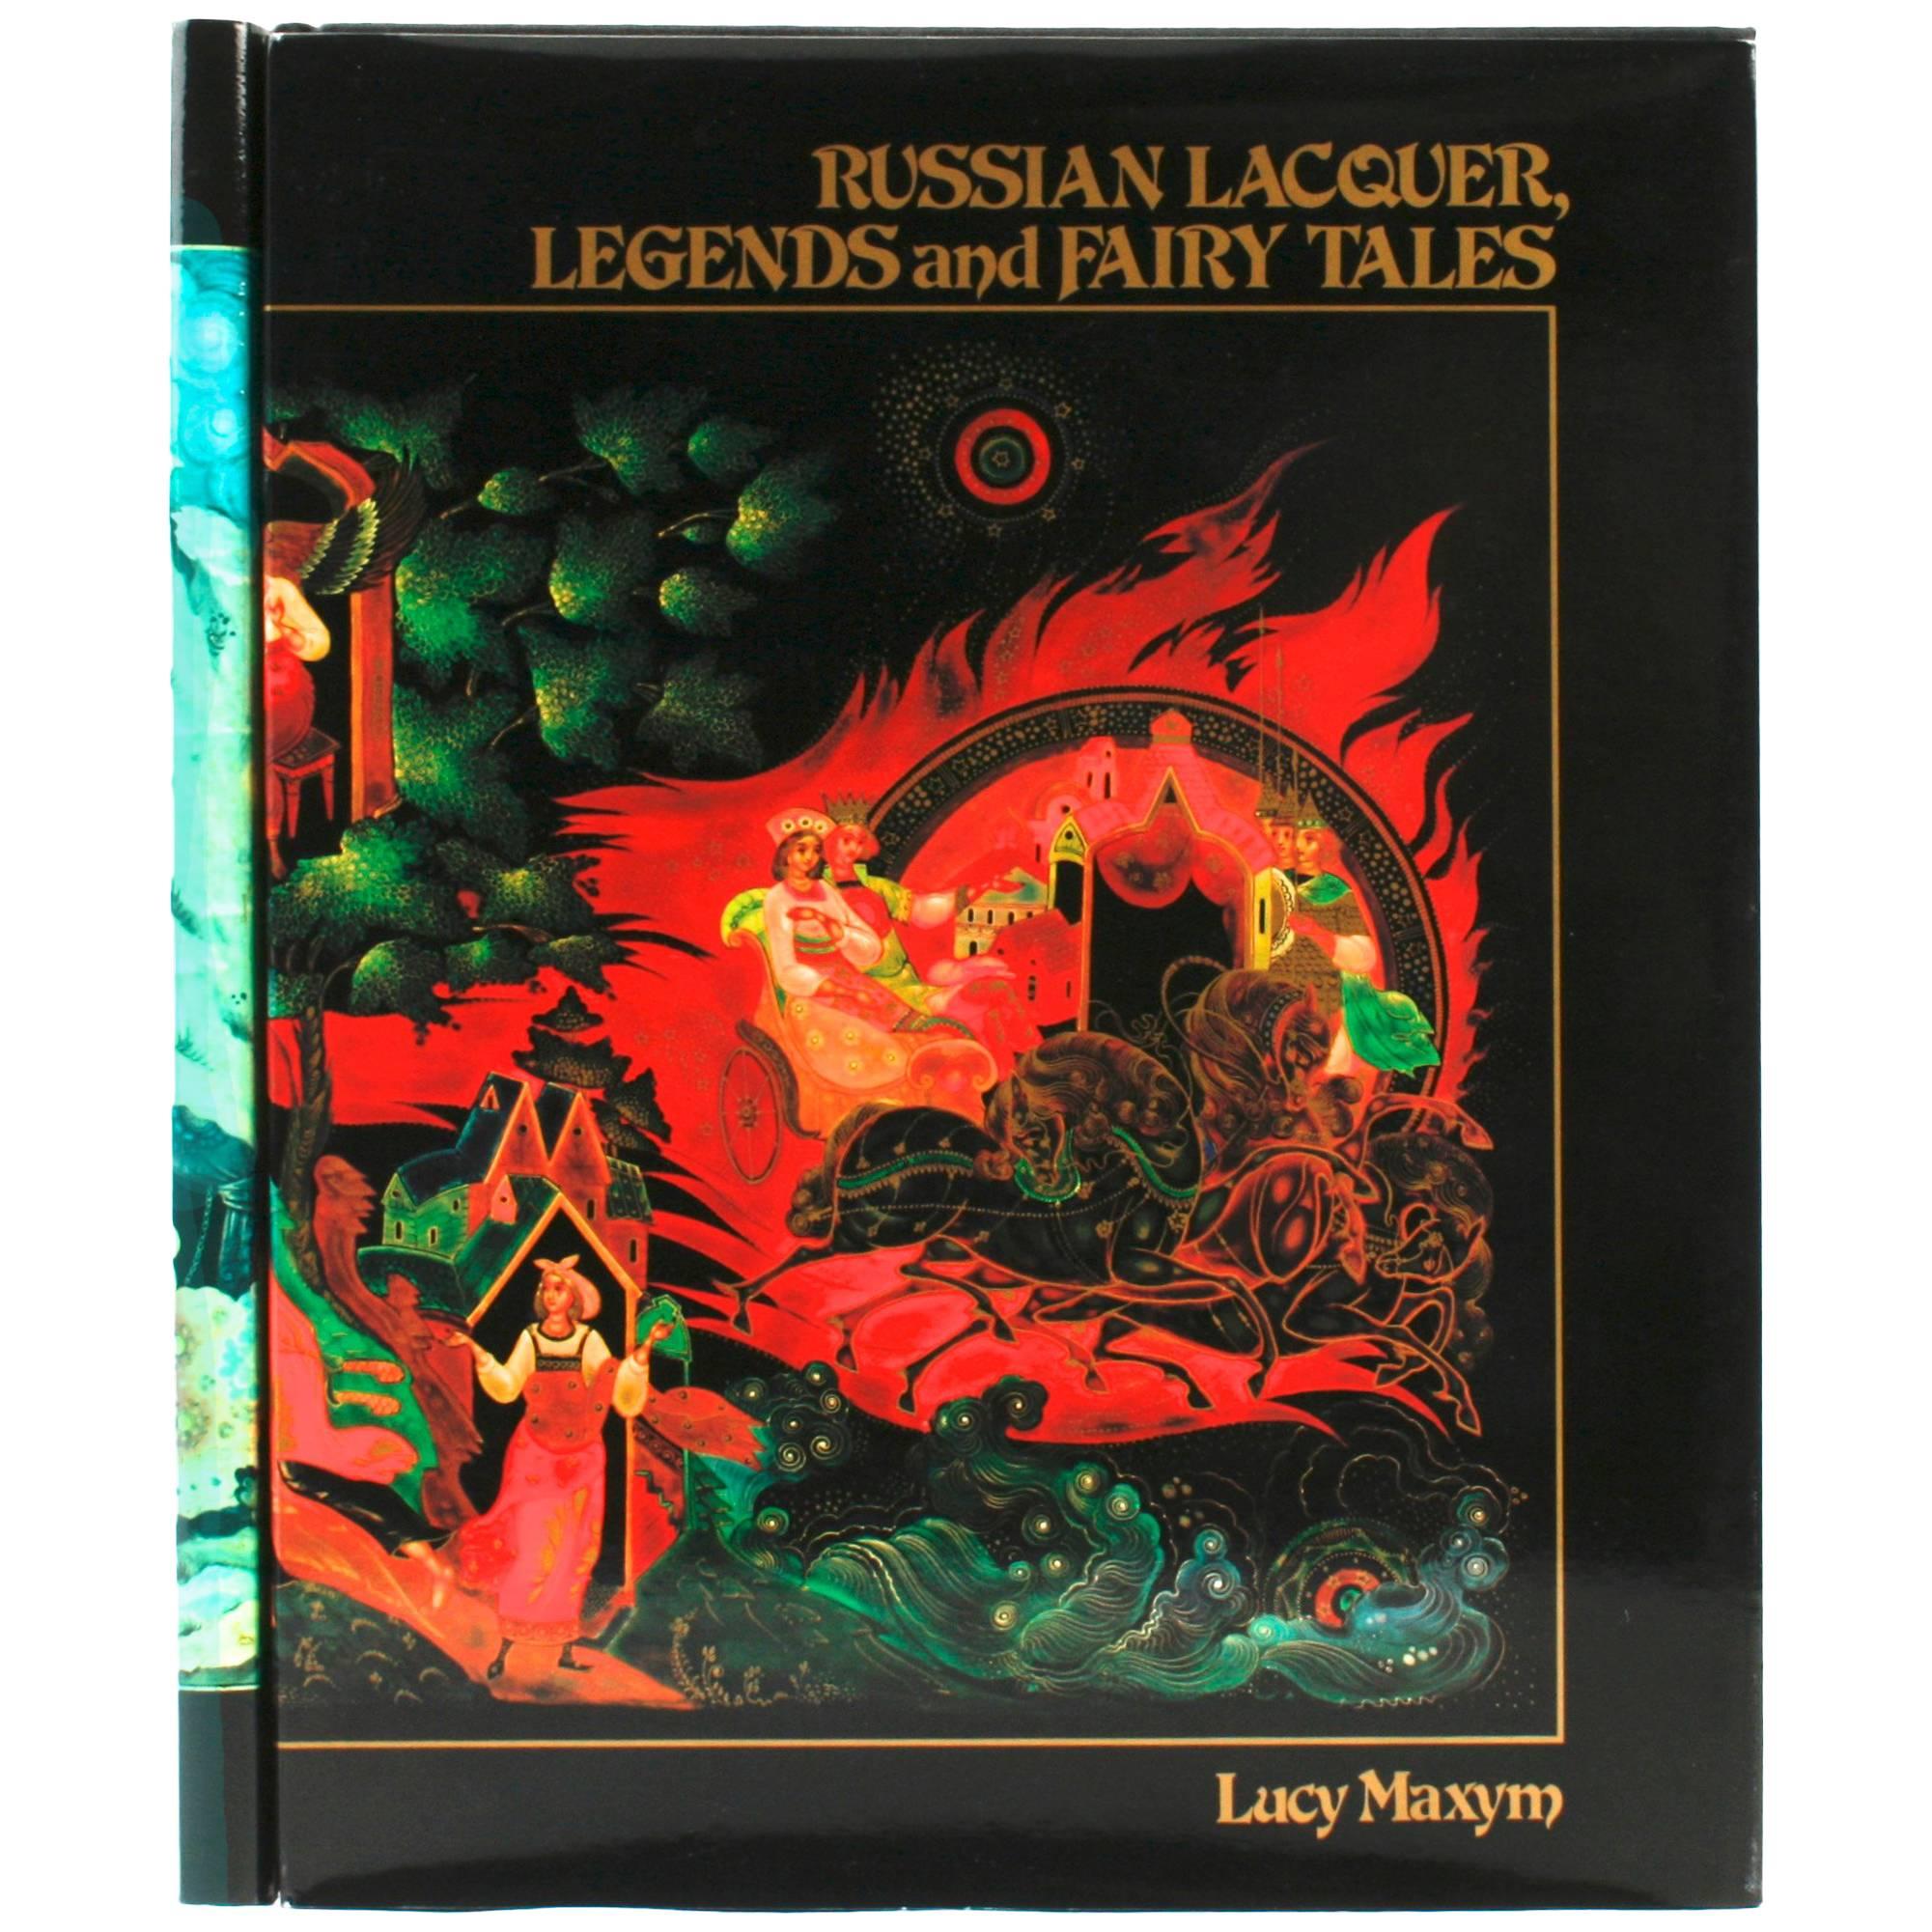 Russian Lacquer, Legends and Fairy Tales Volumes I and II